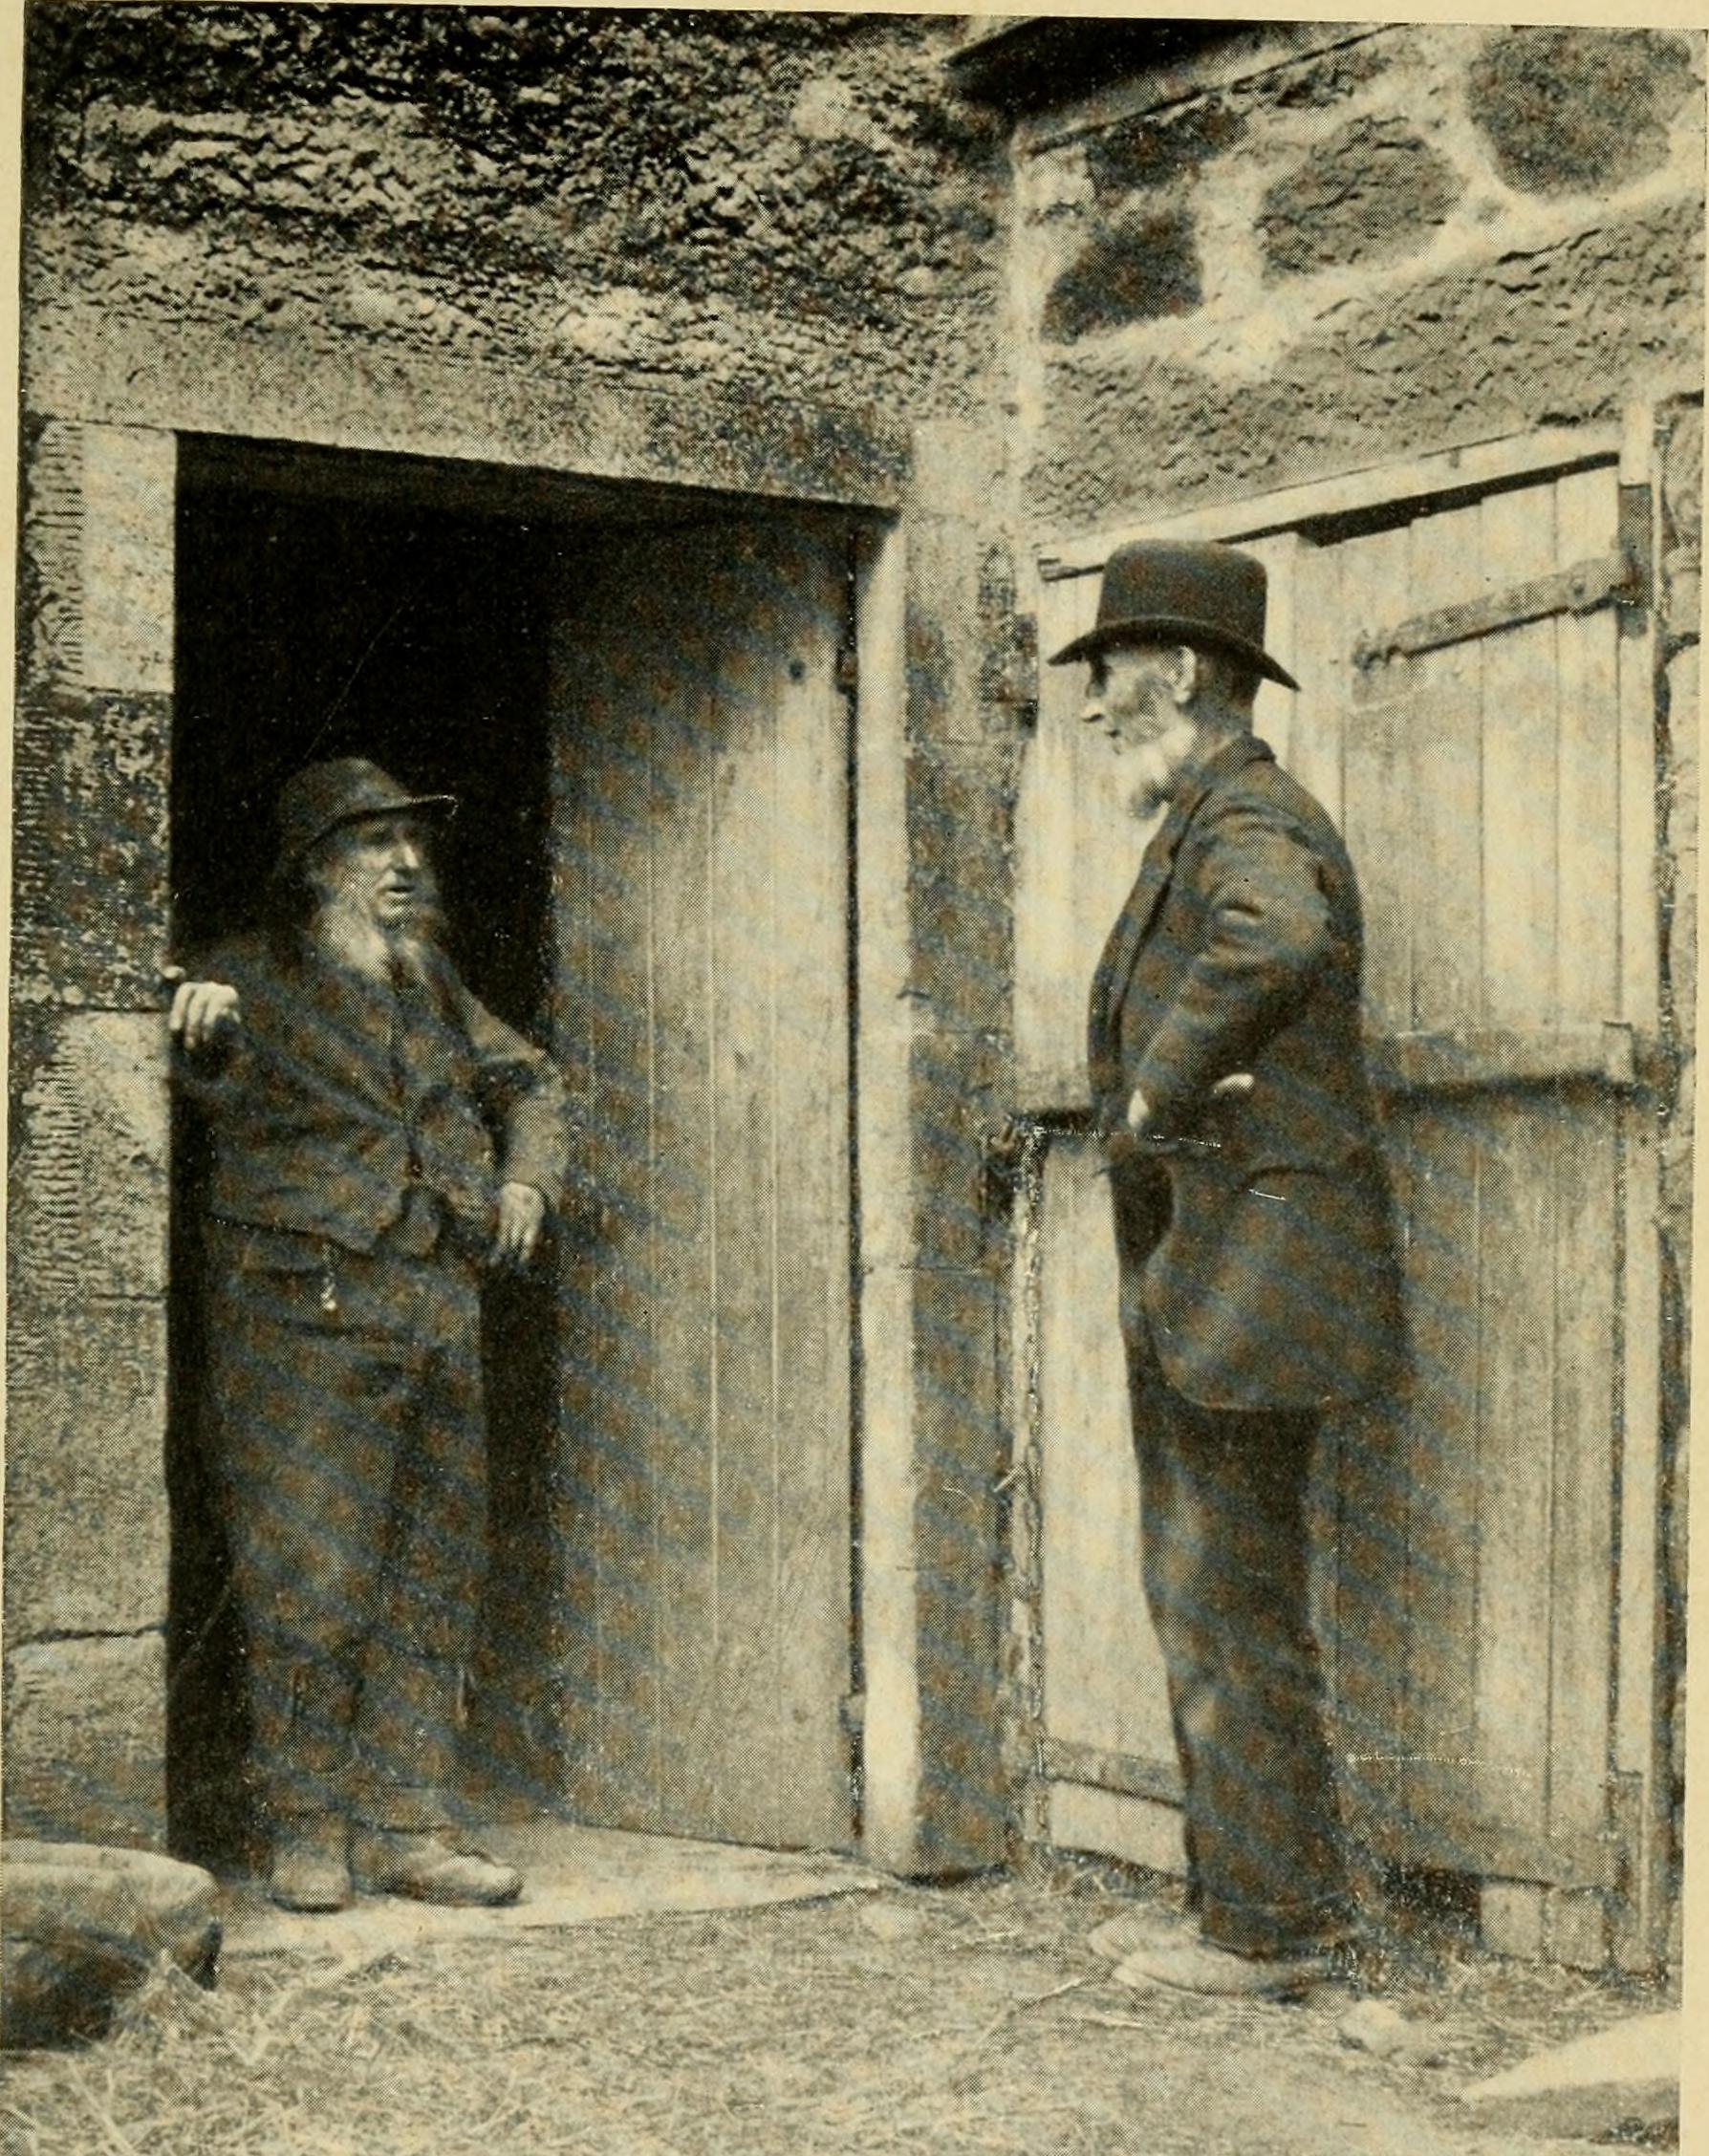 Image from page 106 of "The land of heather" (1904)